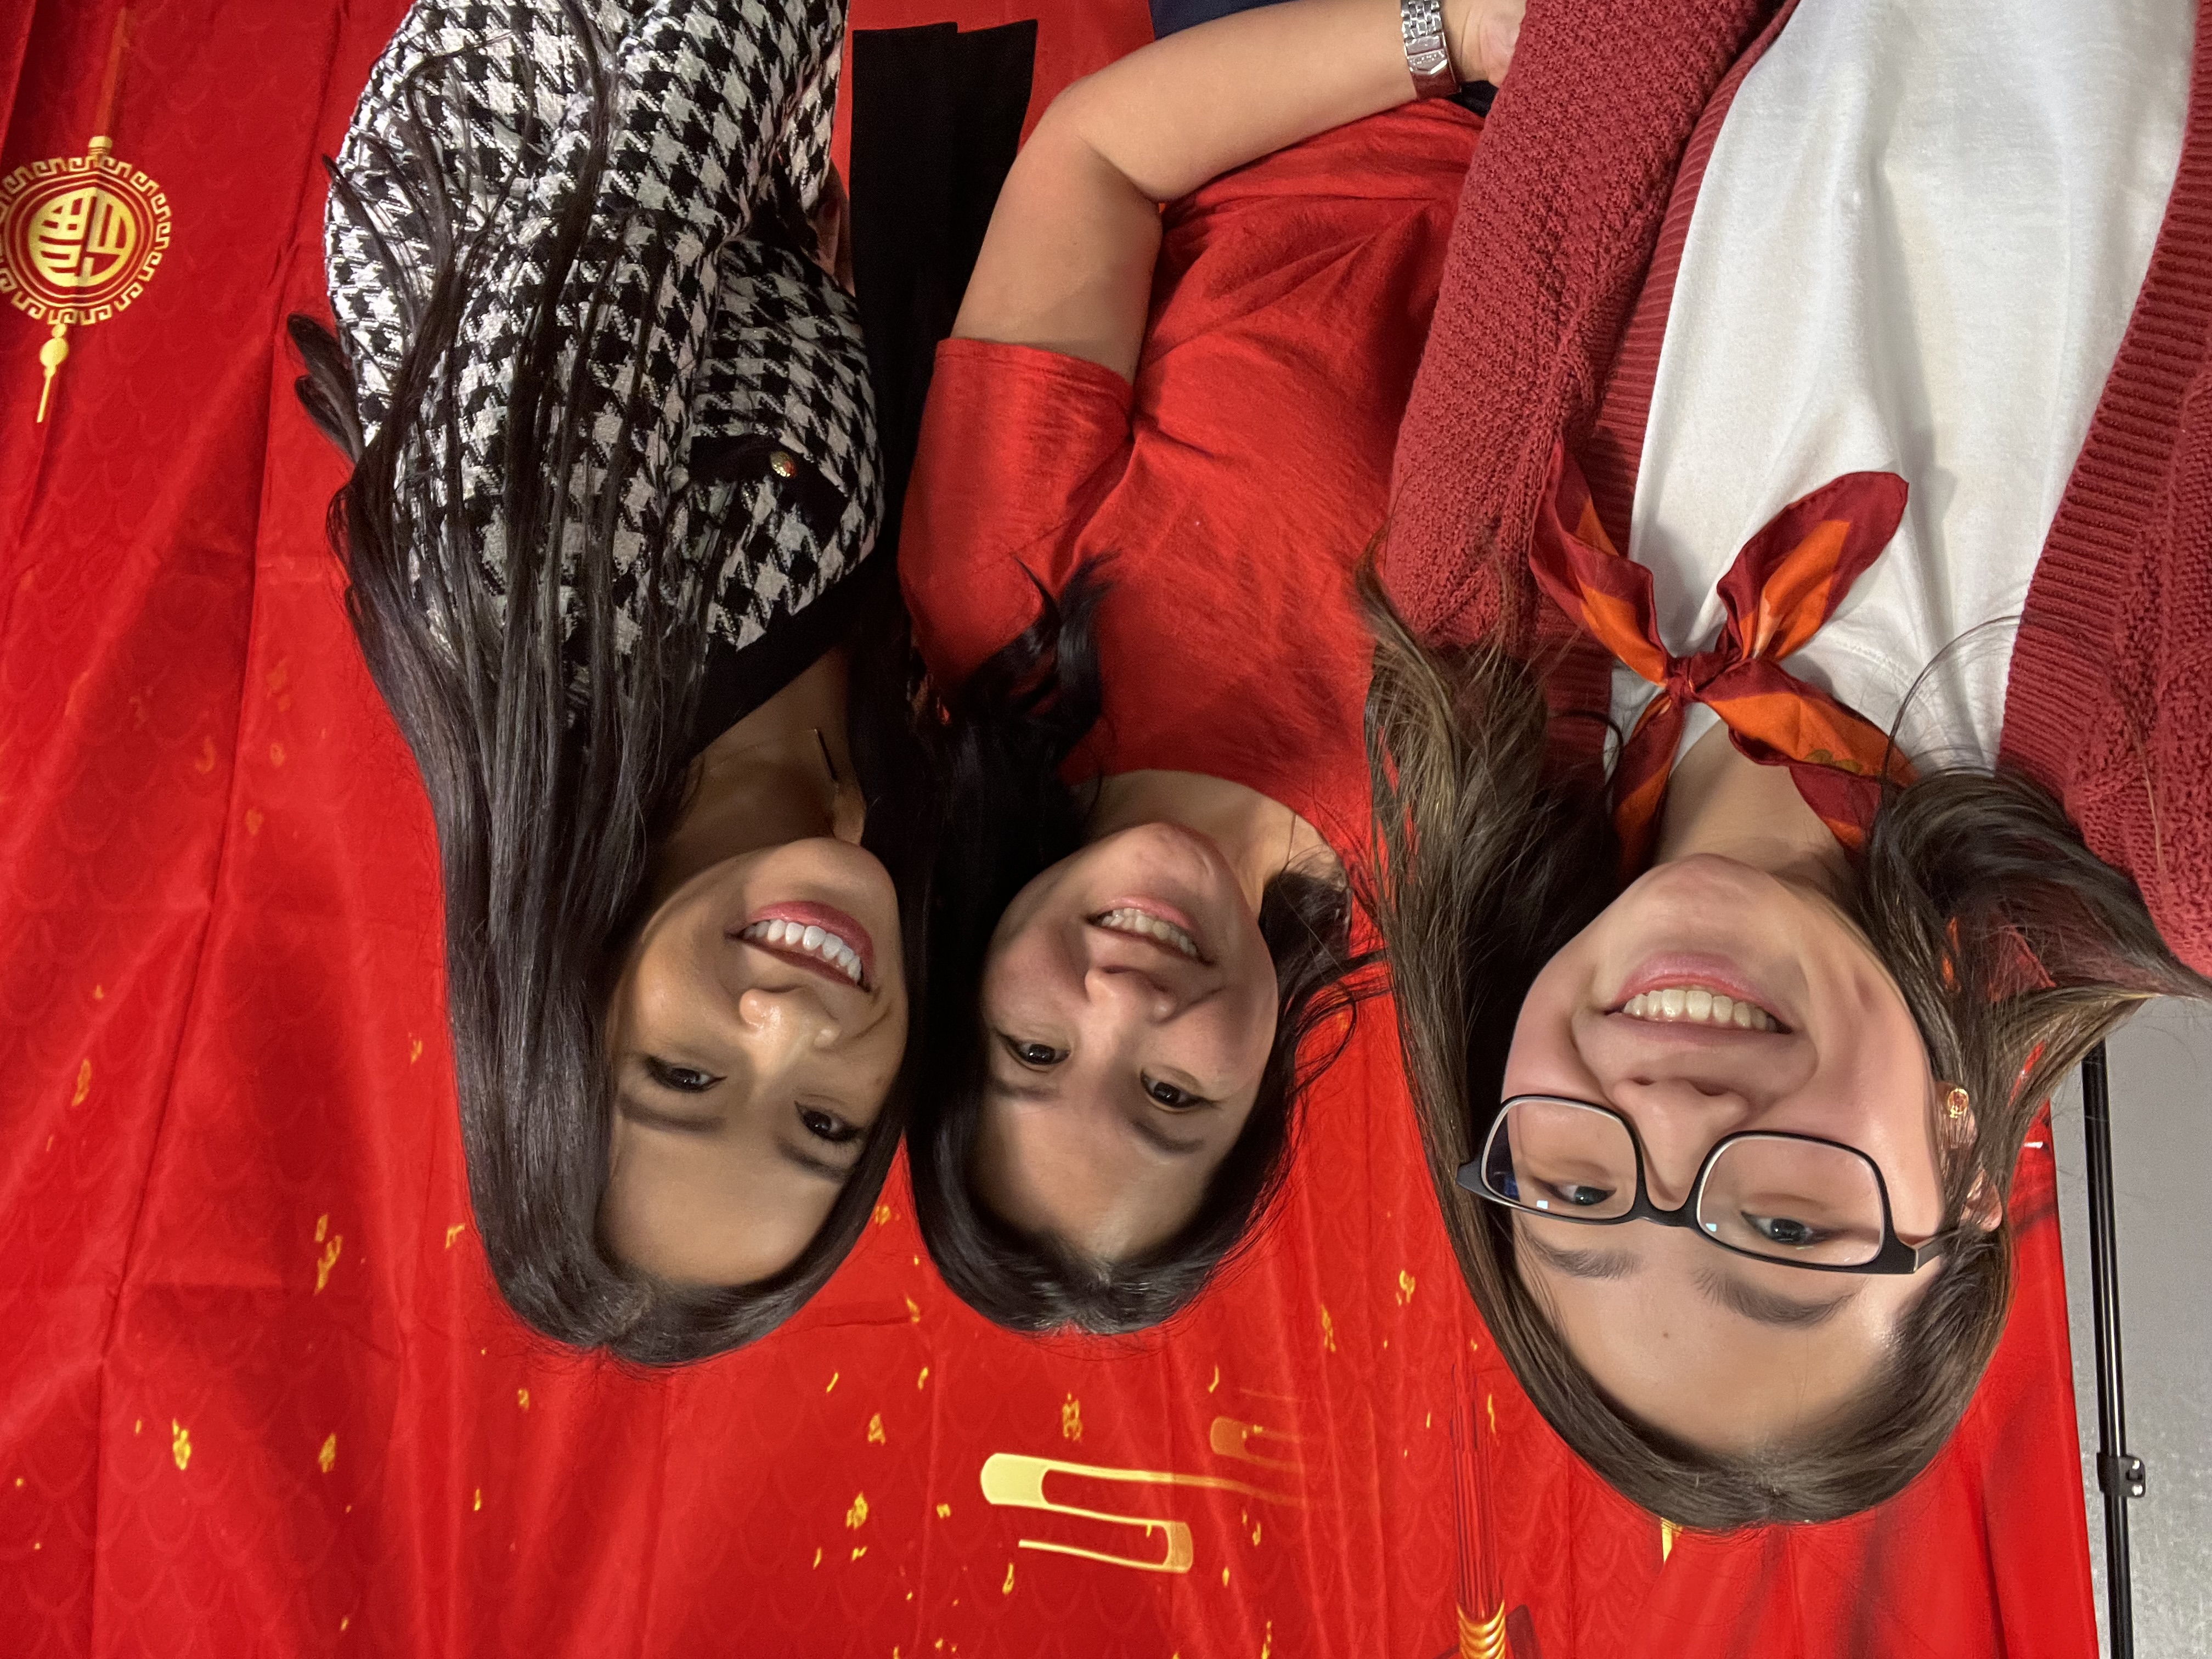 Joann poses with two other women at a Dell Lunar New Year activity.